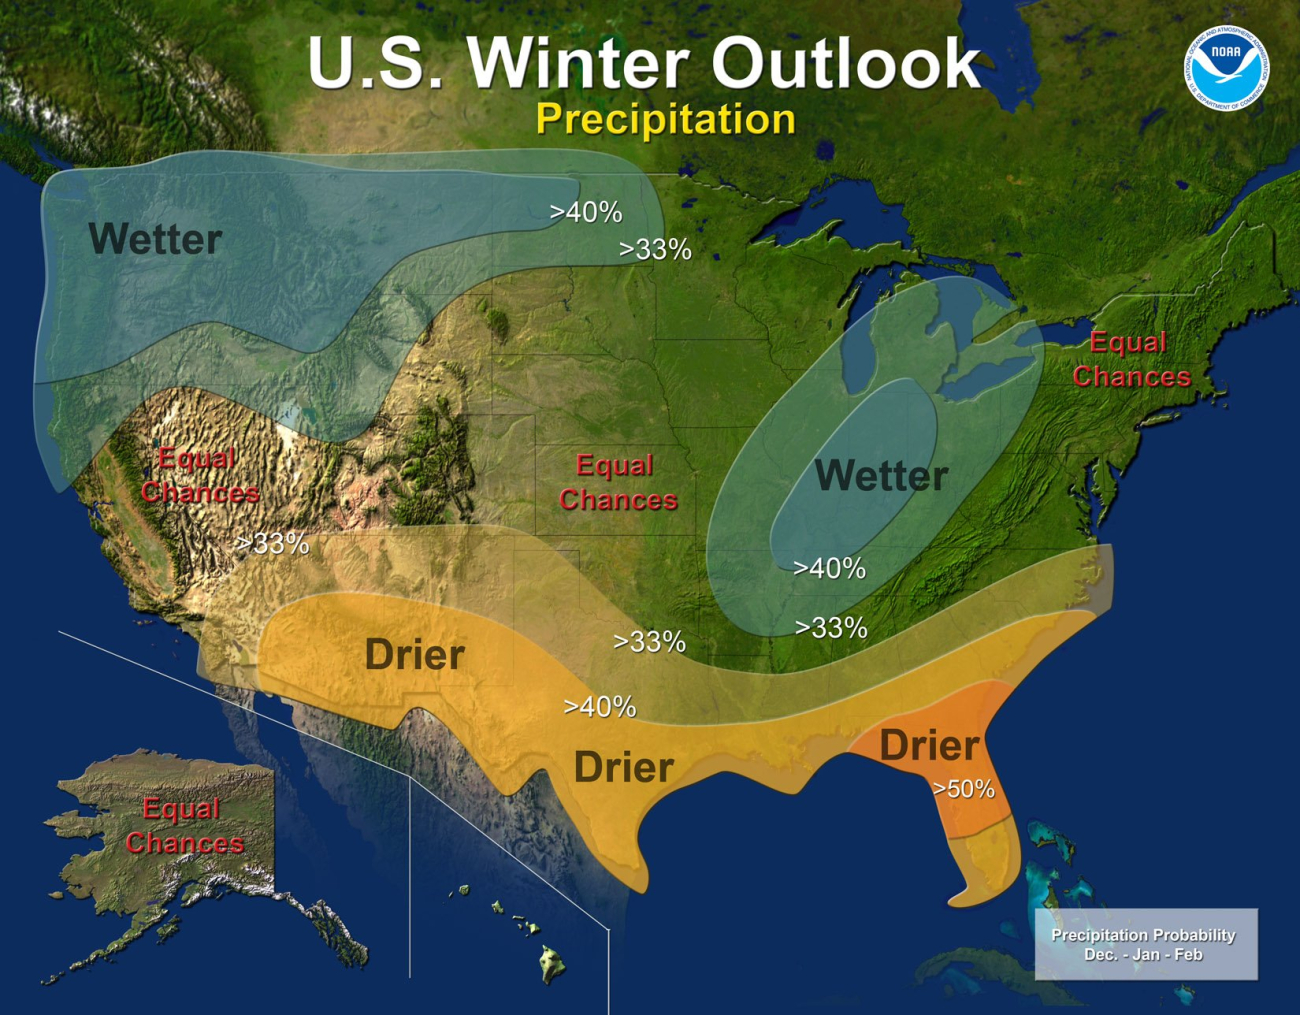 Winter weather precipitation outlook for the 2010-2011 winter